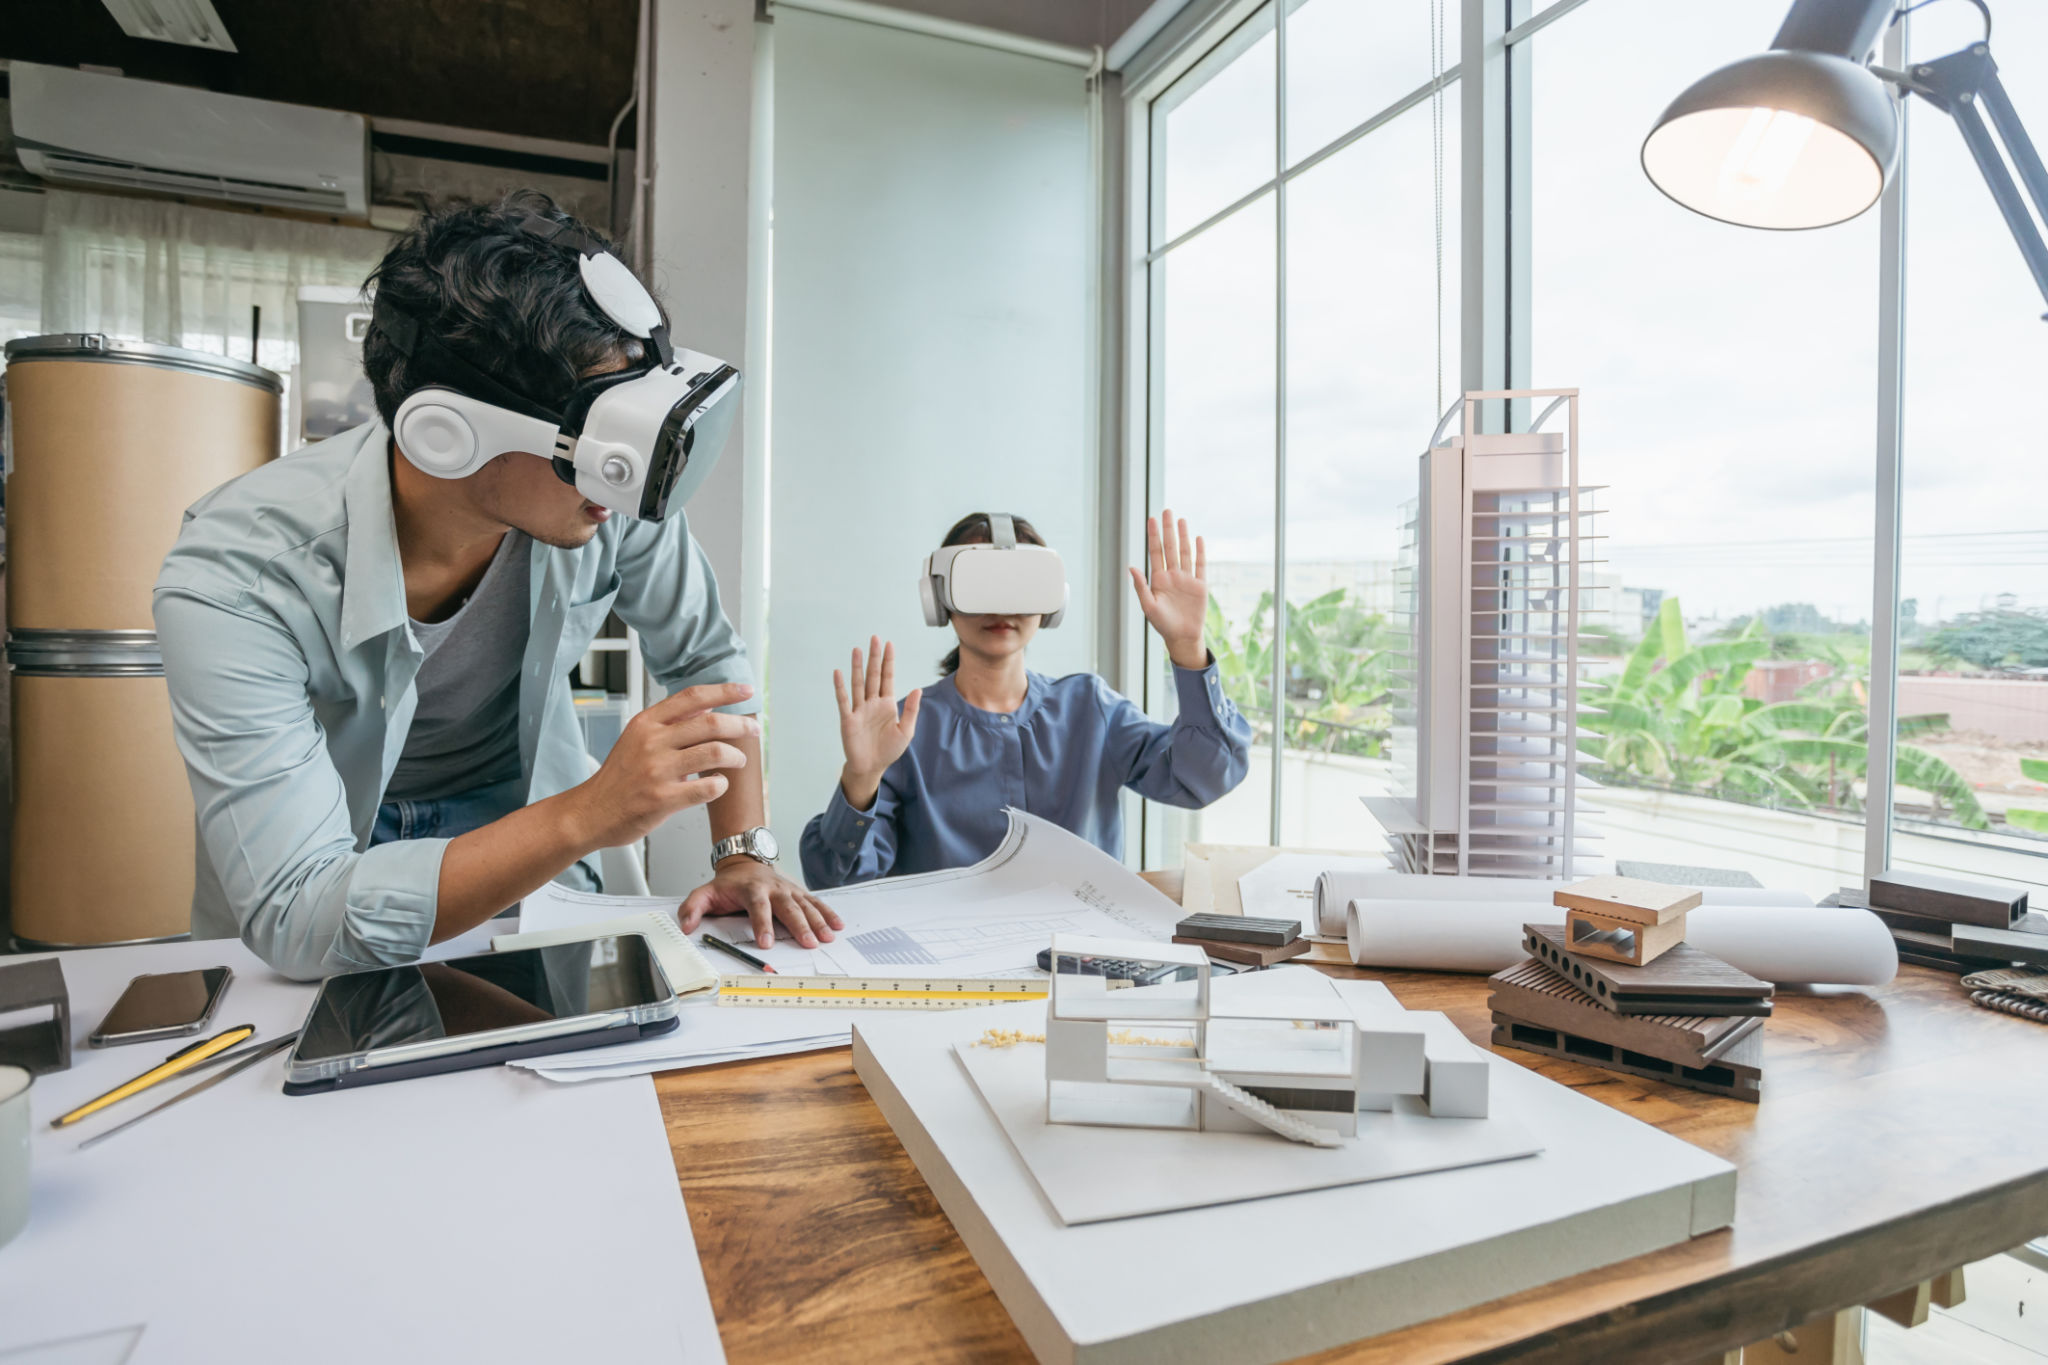 virtual reality in construction